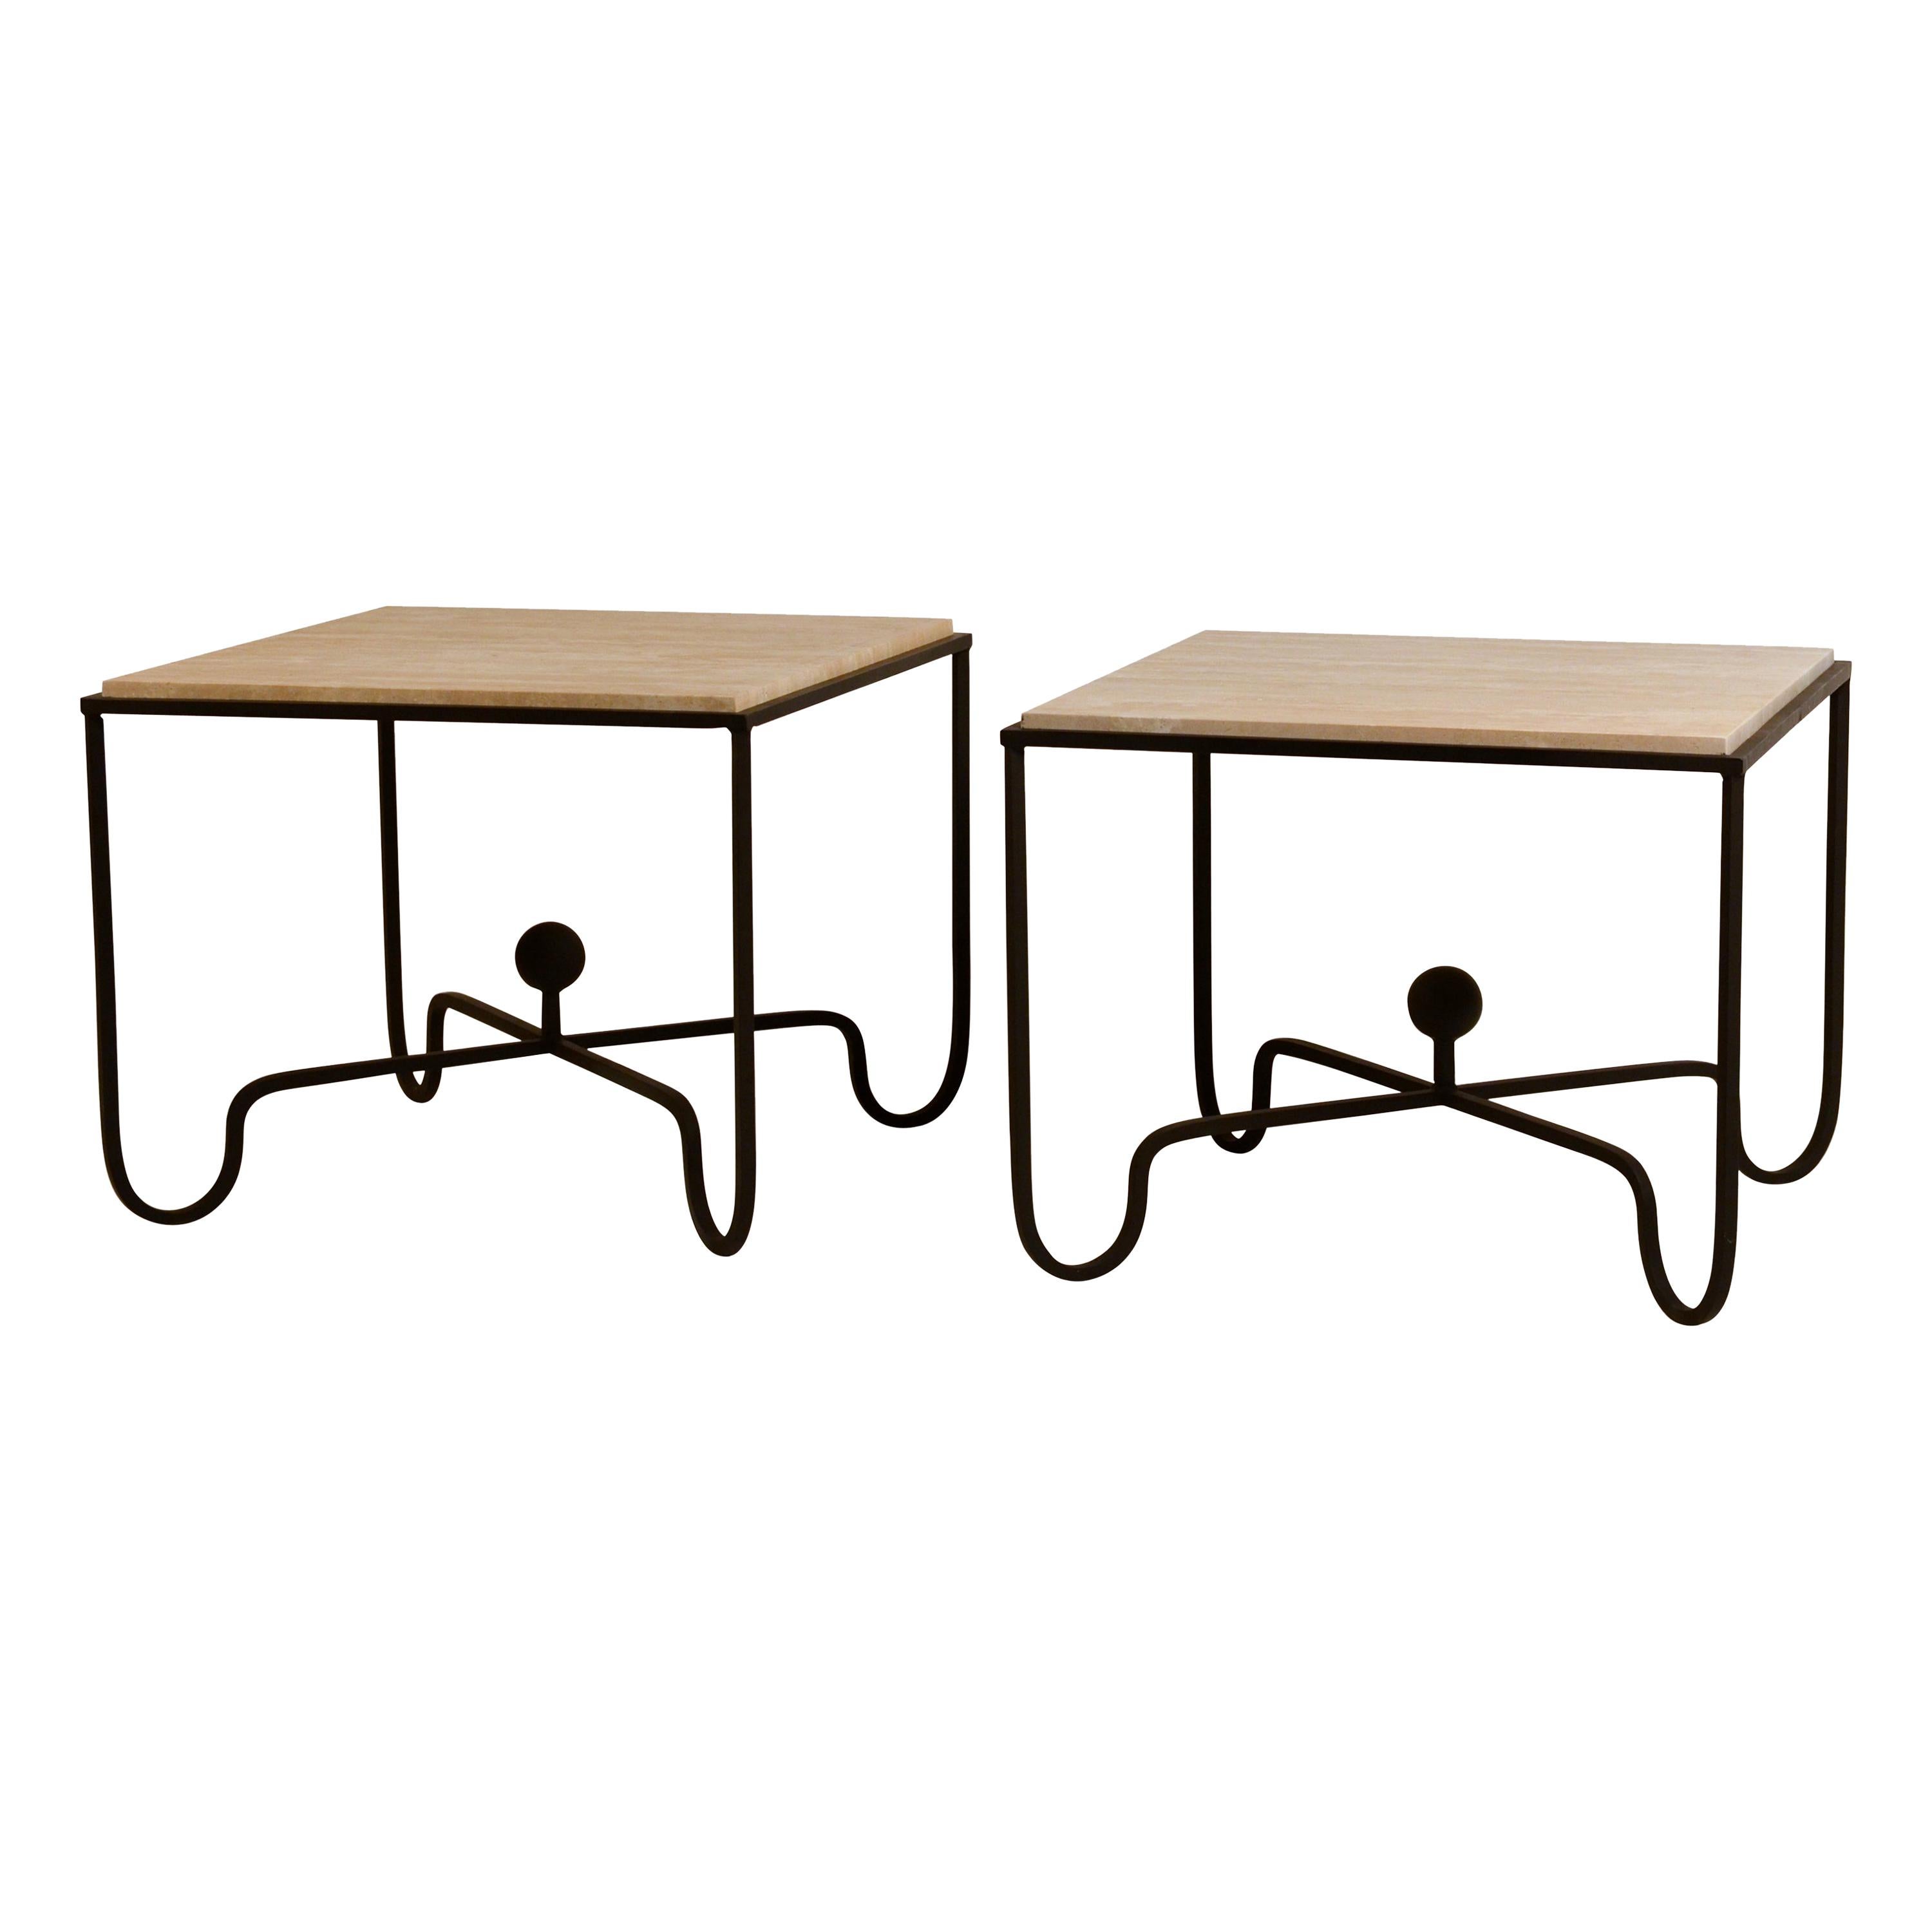 Pair of Large 'Entretoise' Cream Travertine Side Tables by Design Freres For Sale